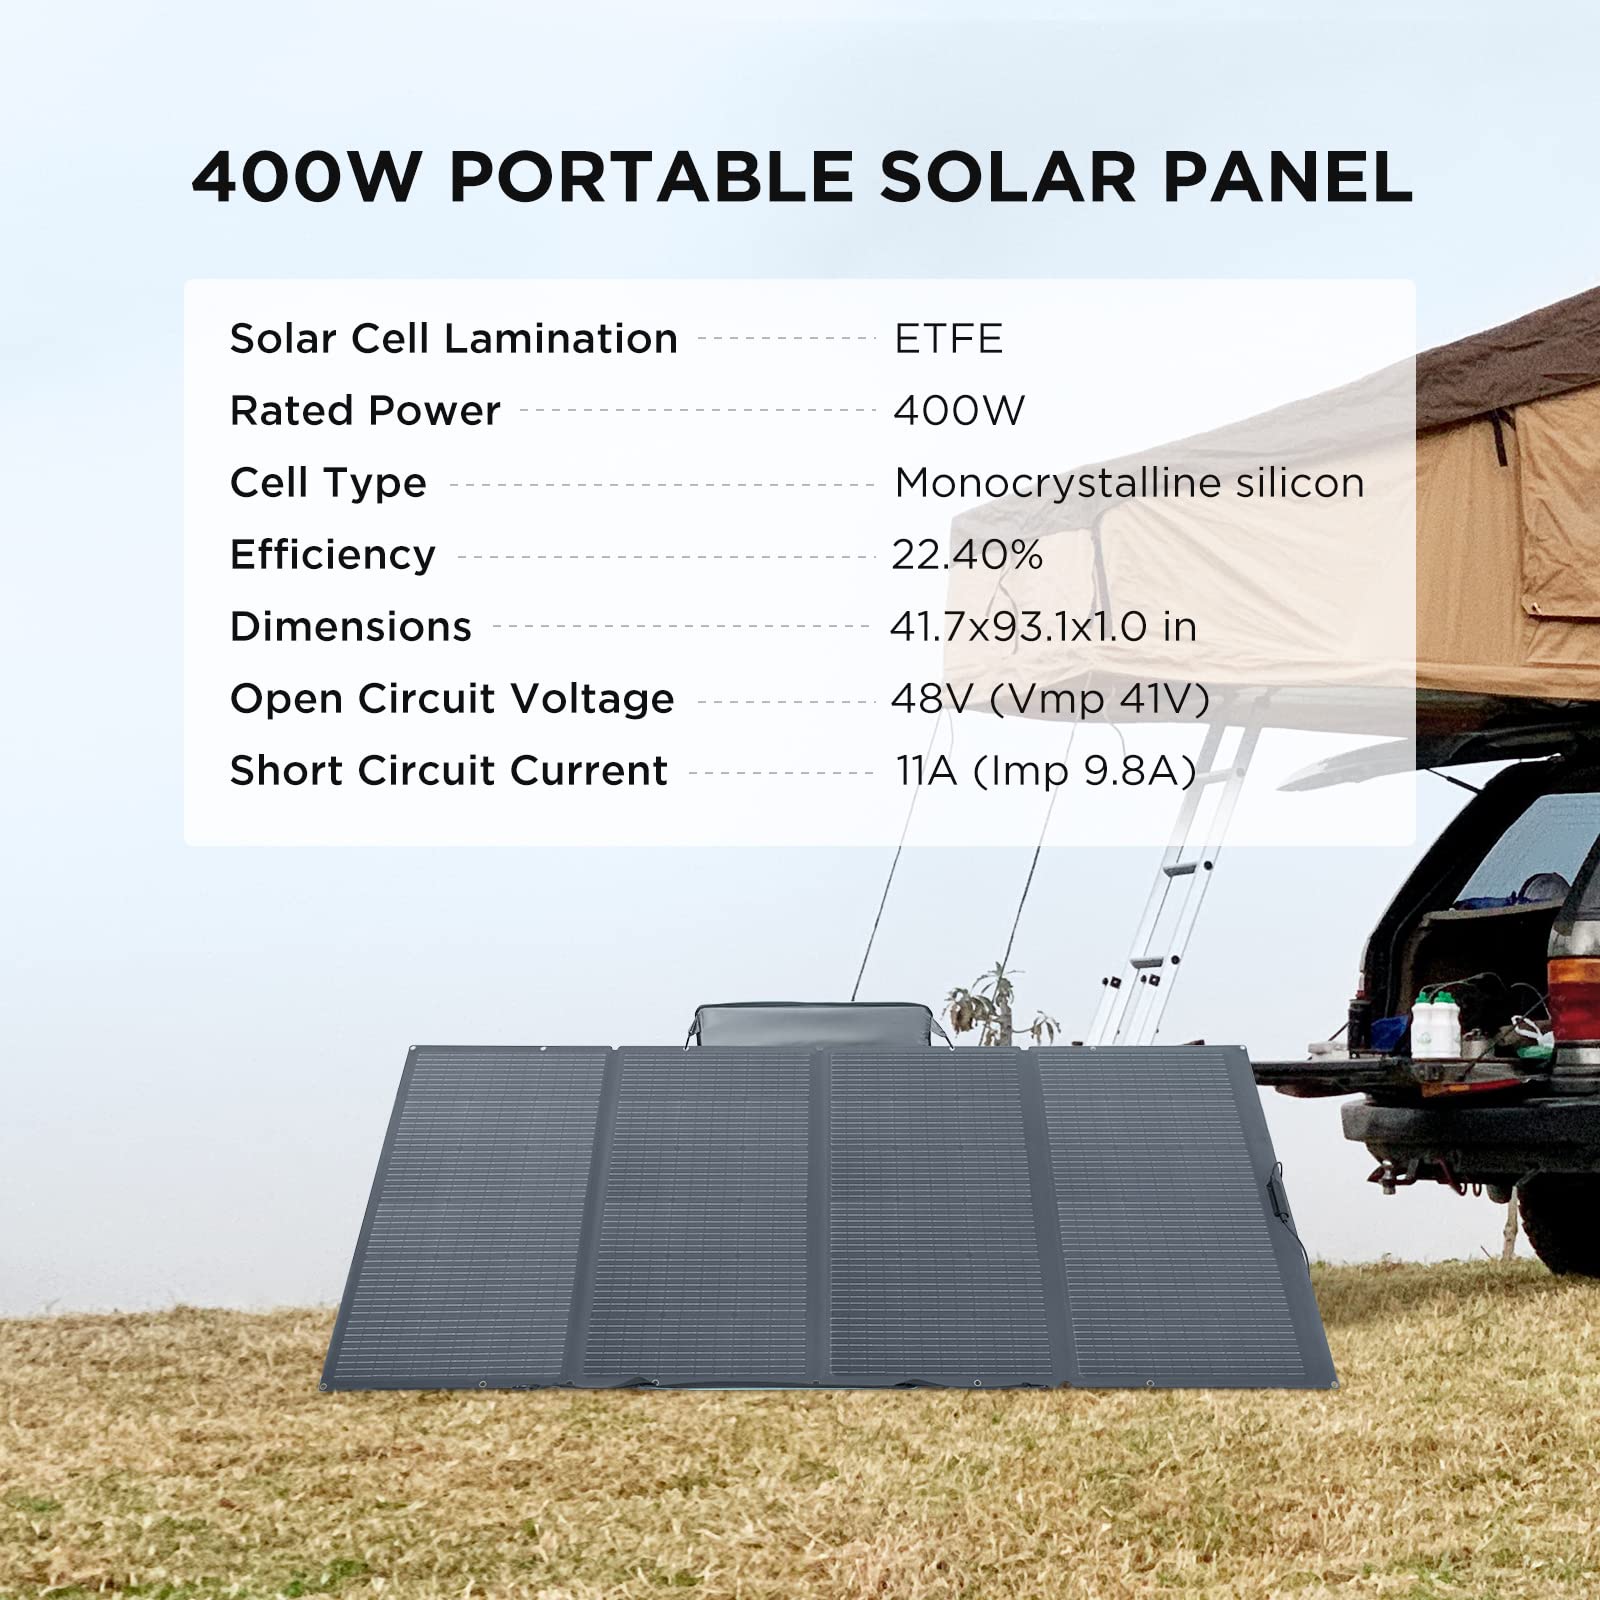 EF ECOFLOW Solar Generator 256Wh RIVER 2 with 400W Solar Panel LiFePO4 Battery, Up to 600W AC Outlets, Portable Power Station for Outdoor Camping/RVs/Home Use